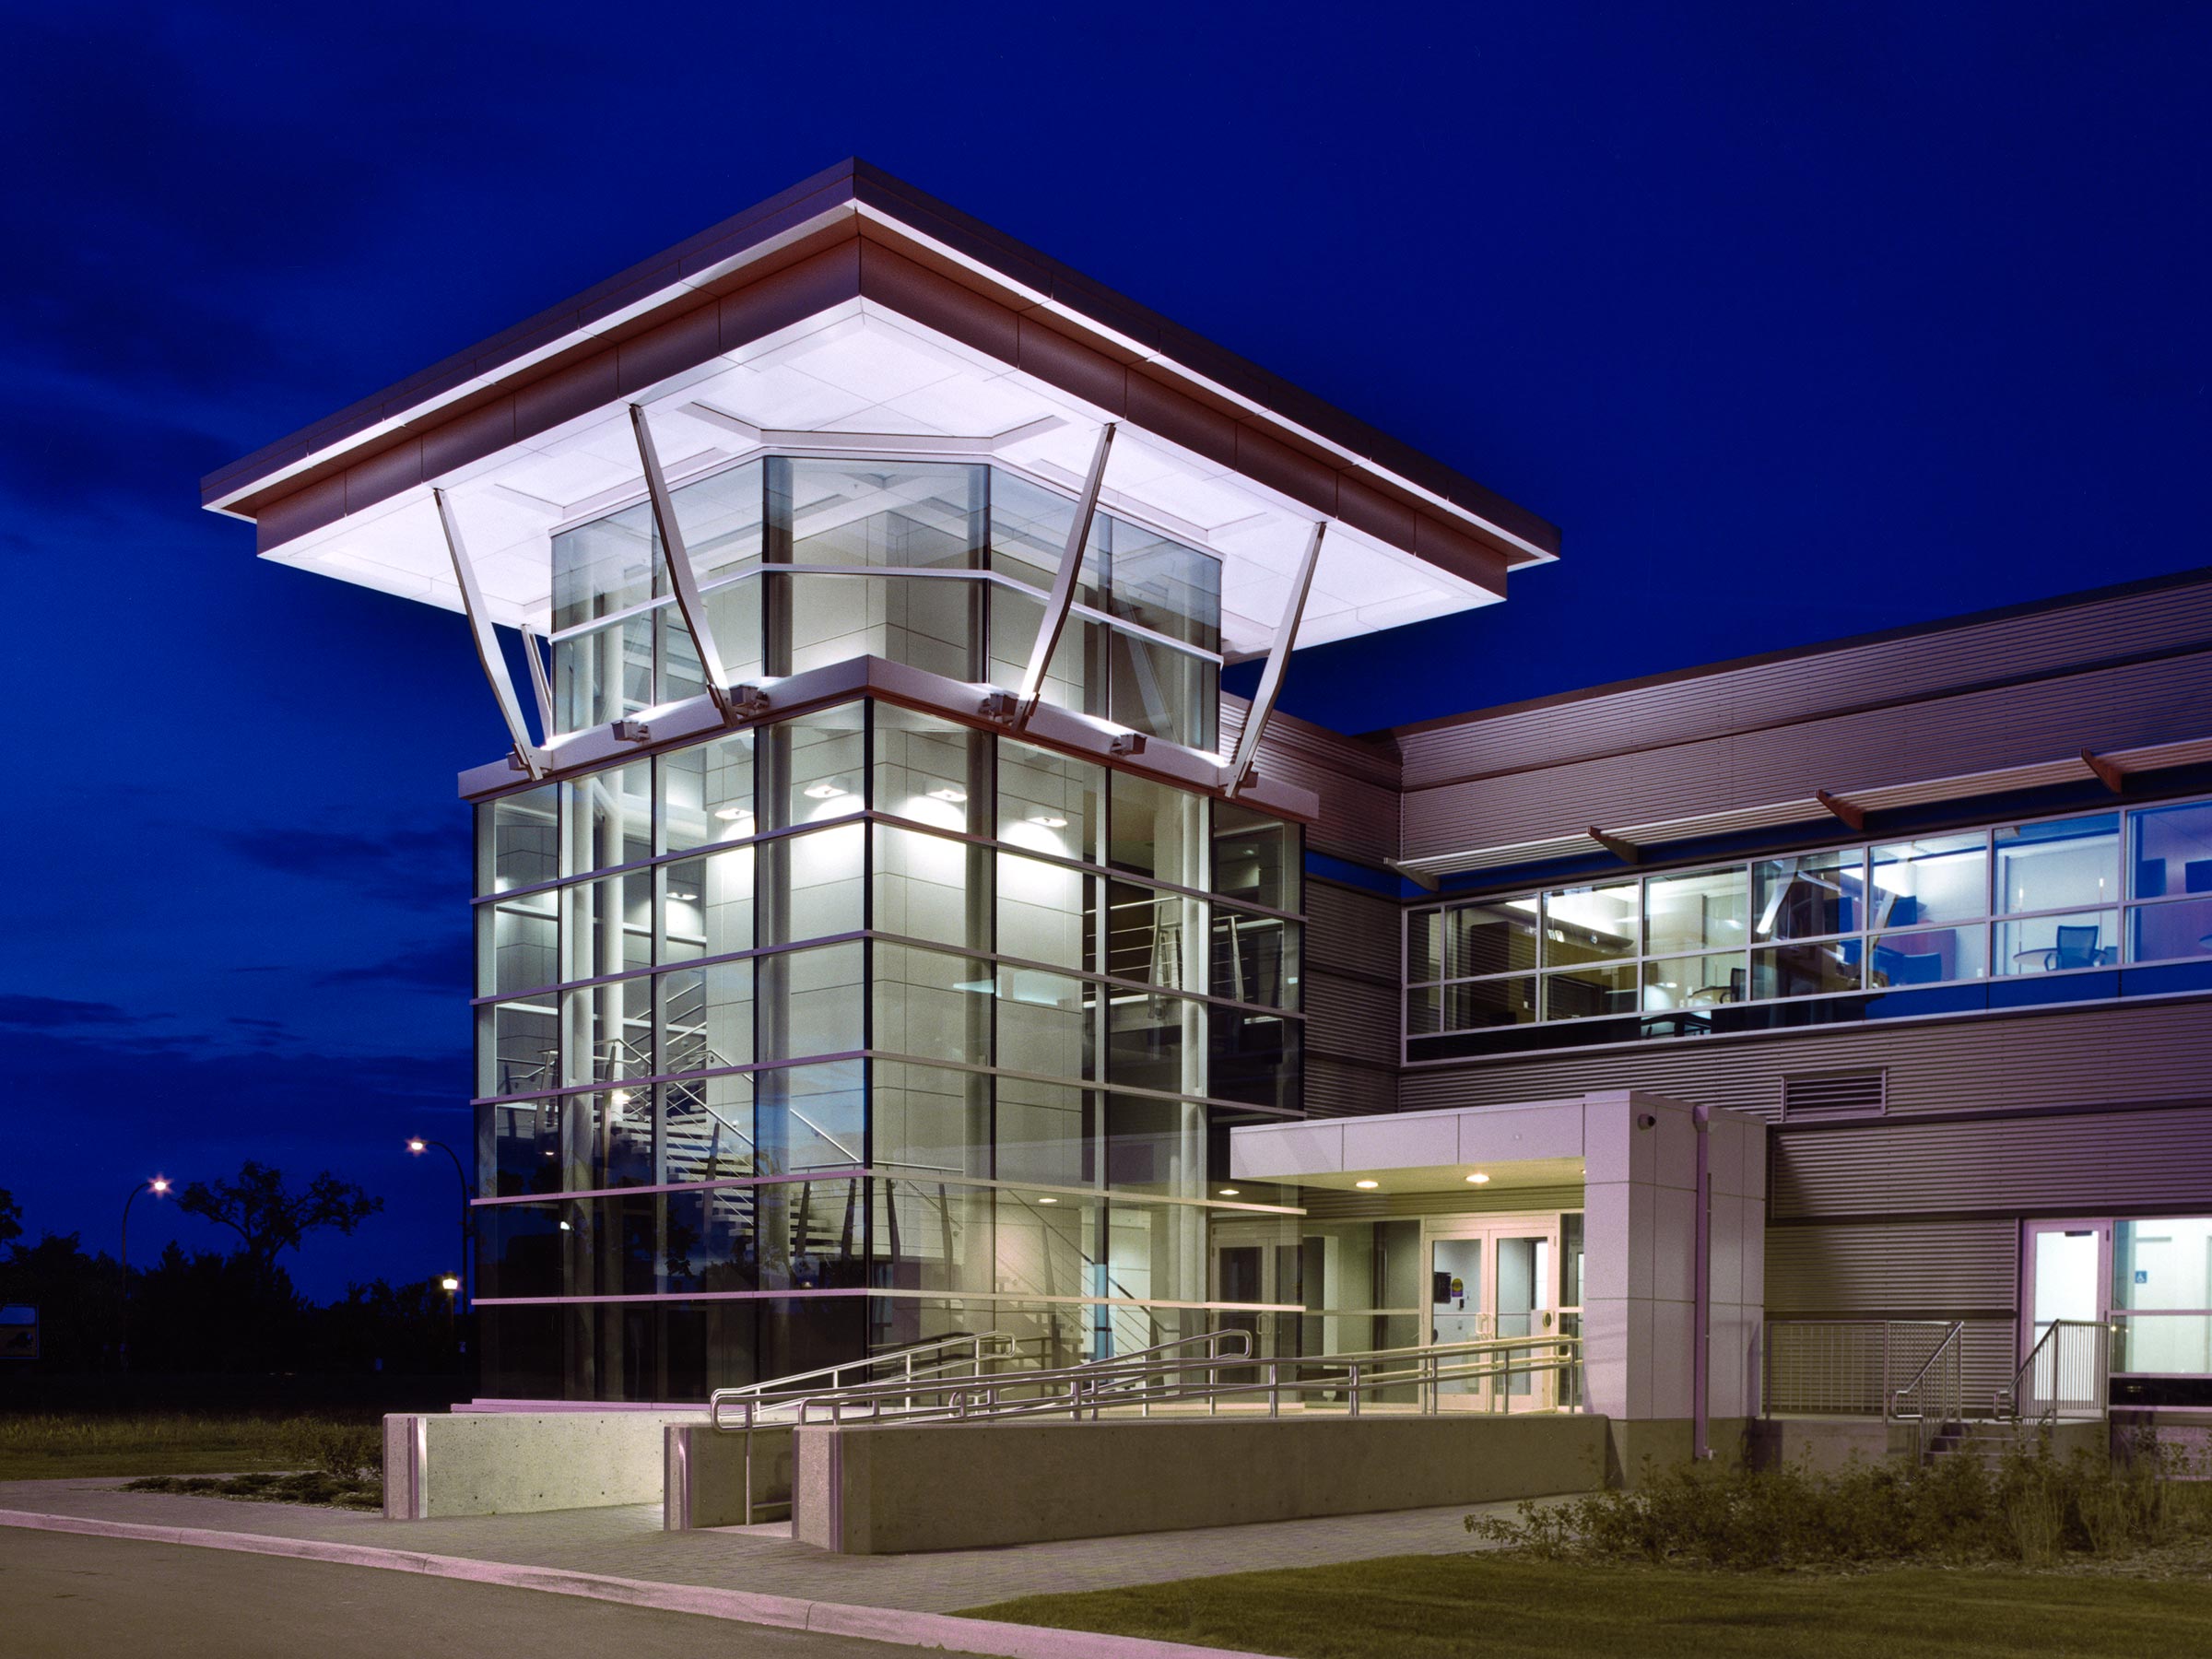 Exterior of Emergent BioSolutions in the evening.